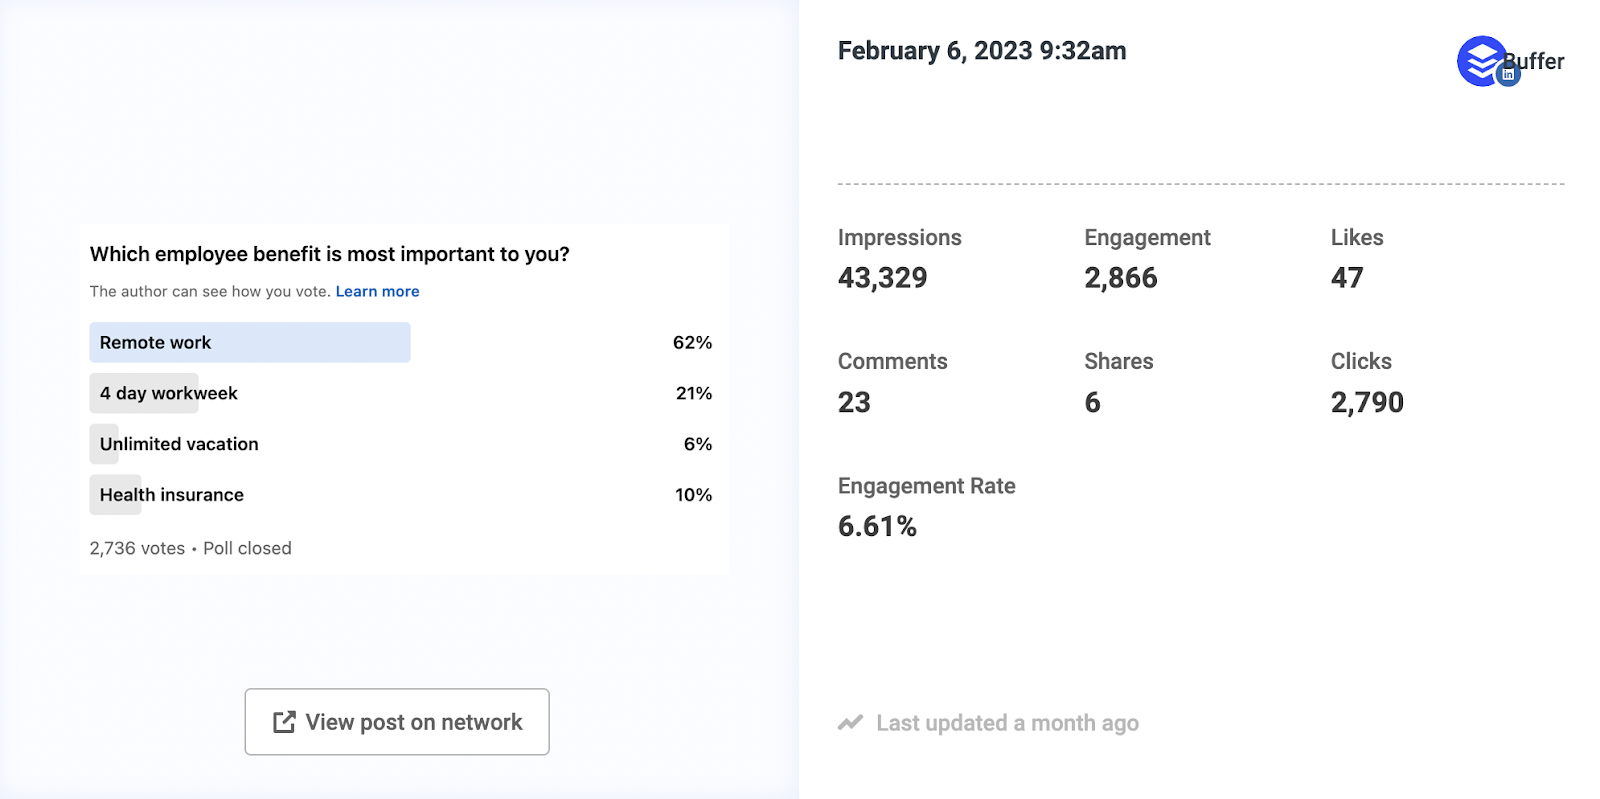 Our Best Performing Social Media Content of 2023, And Why We Think It Worked